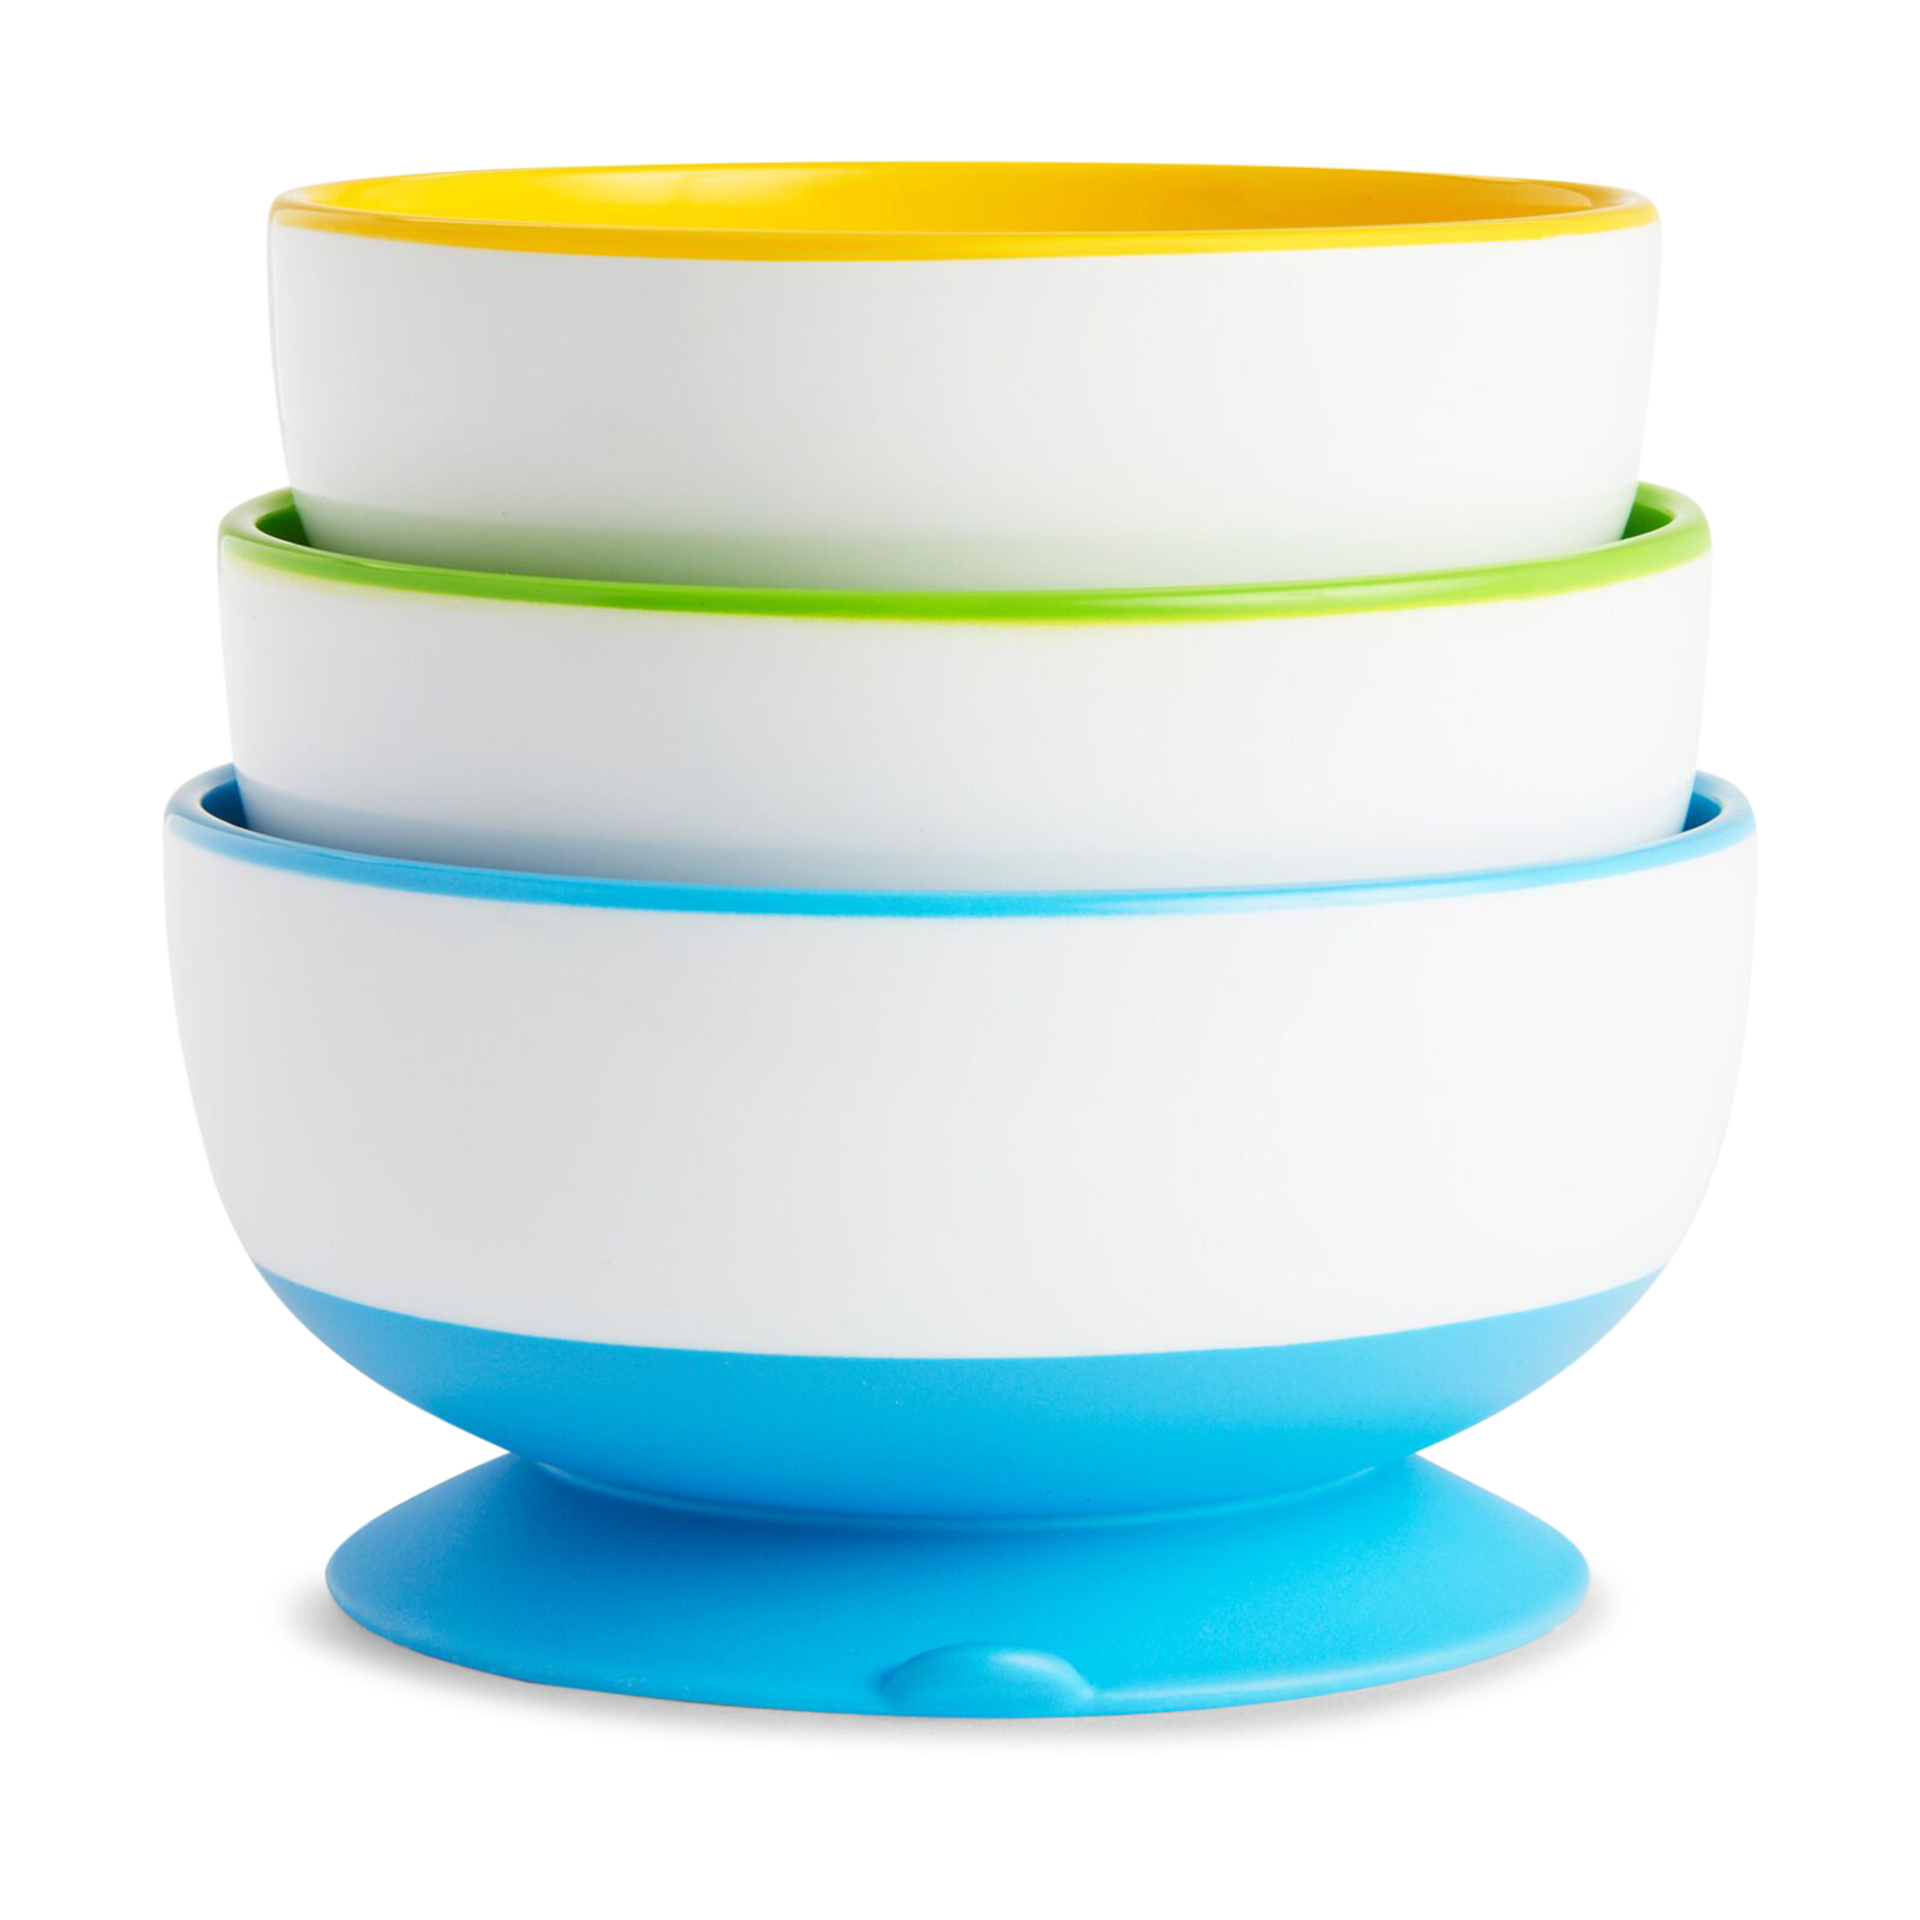 Best Bowls and Plates for Babies of 2020